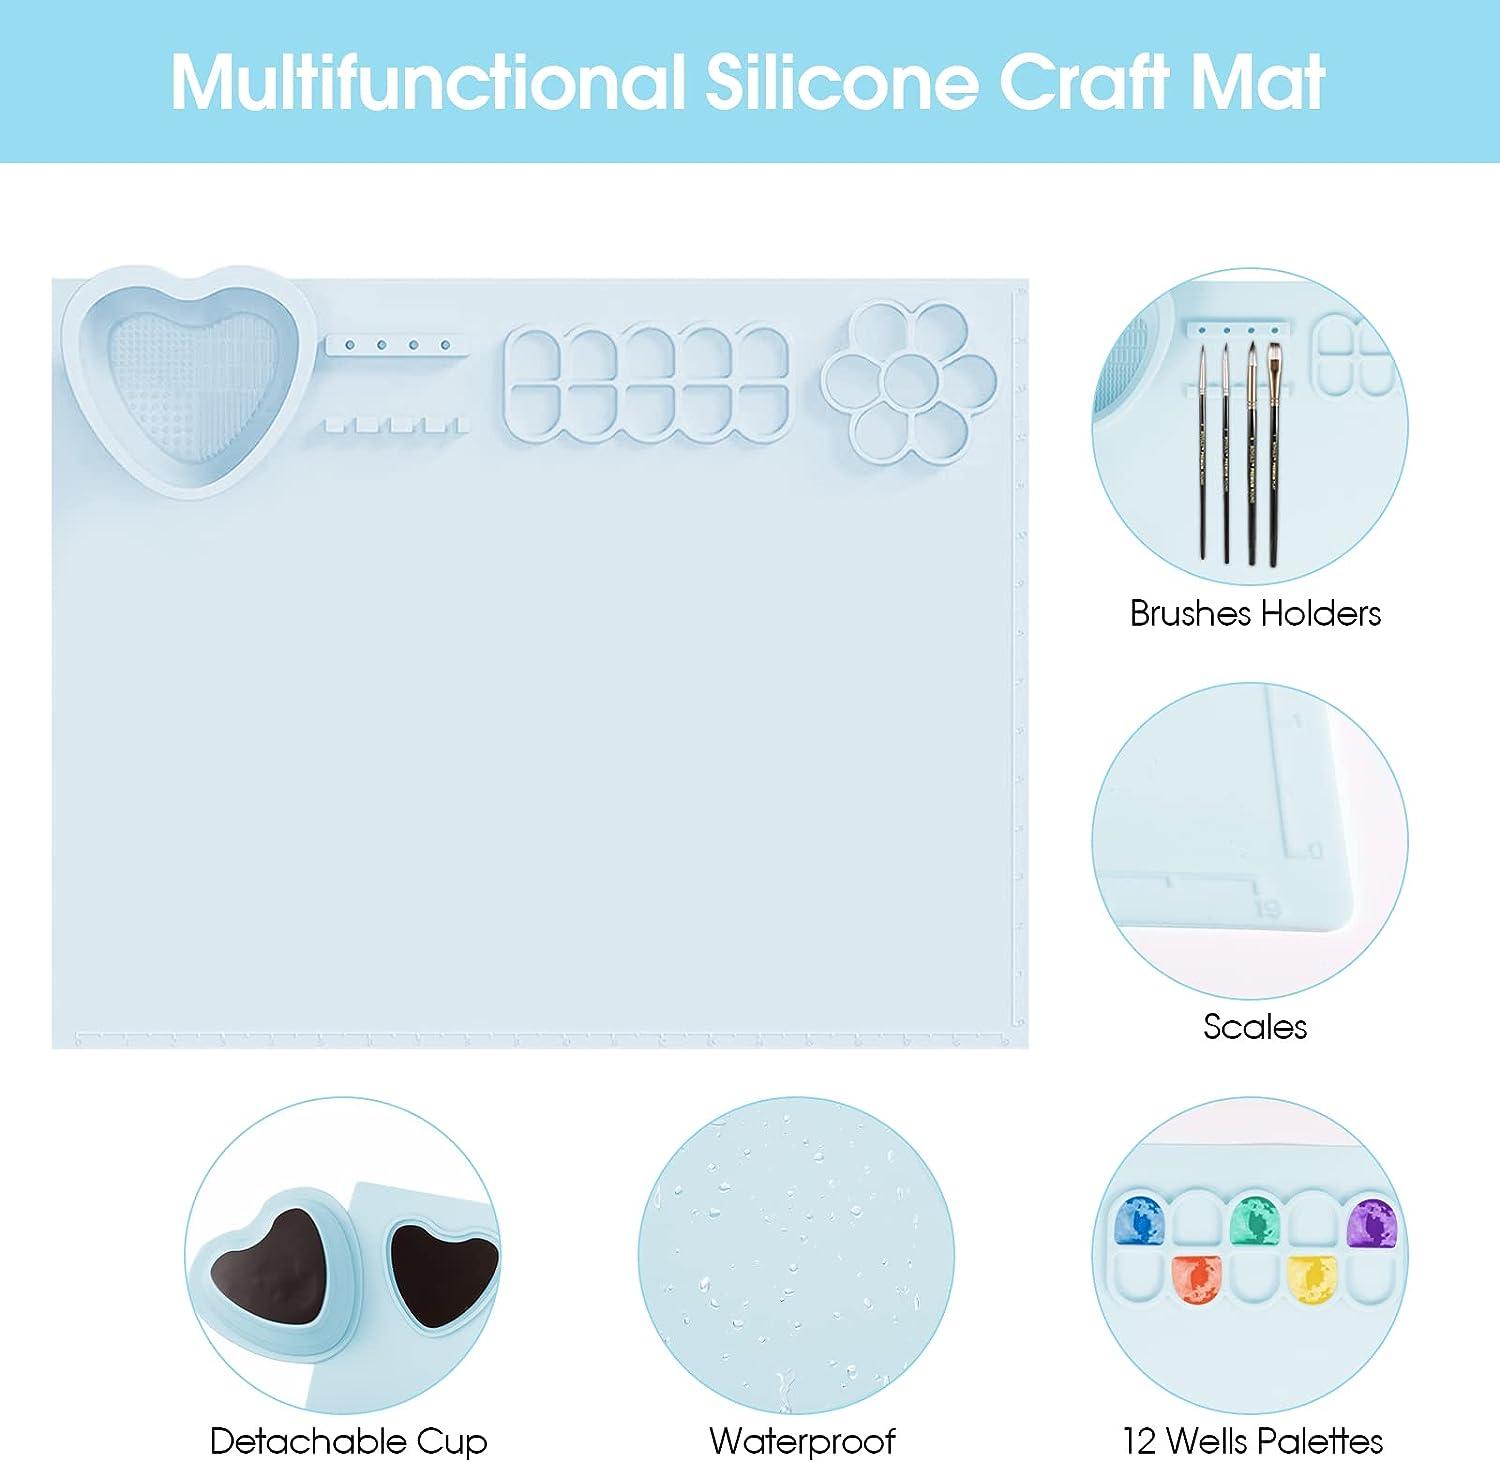  Just Messin' Silicone Art Mat for Crafts, Resin, Paint